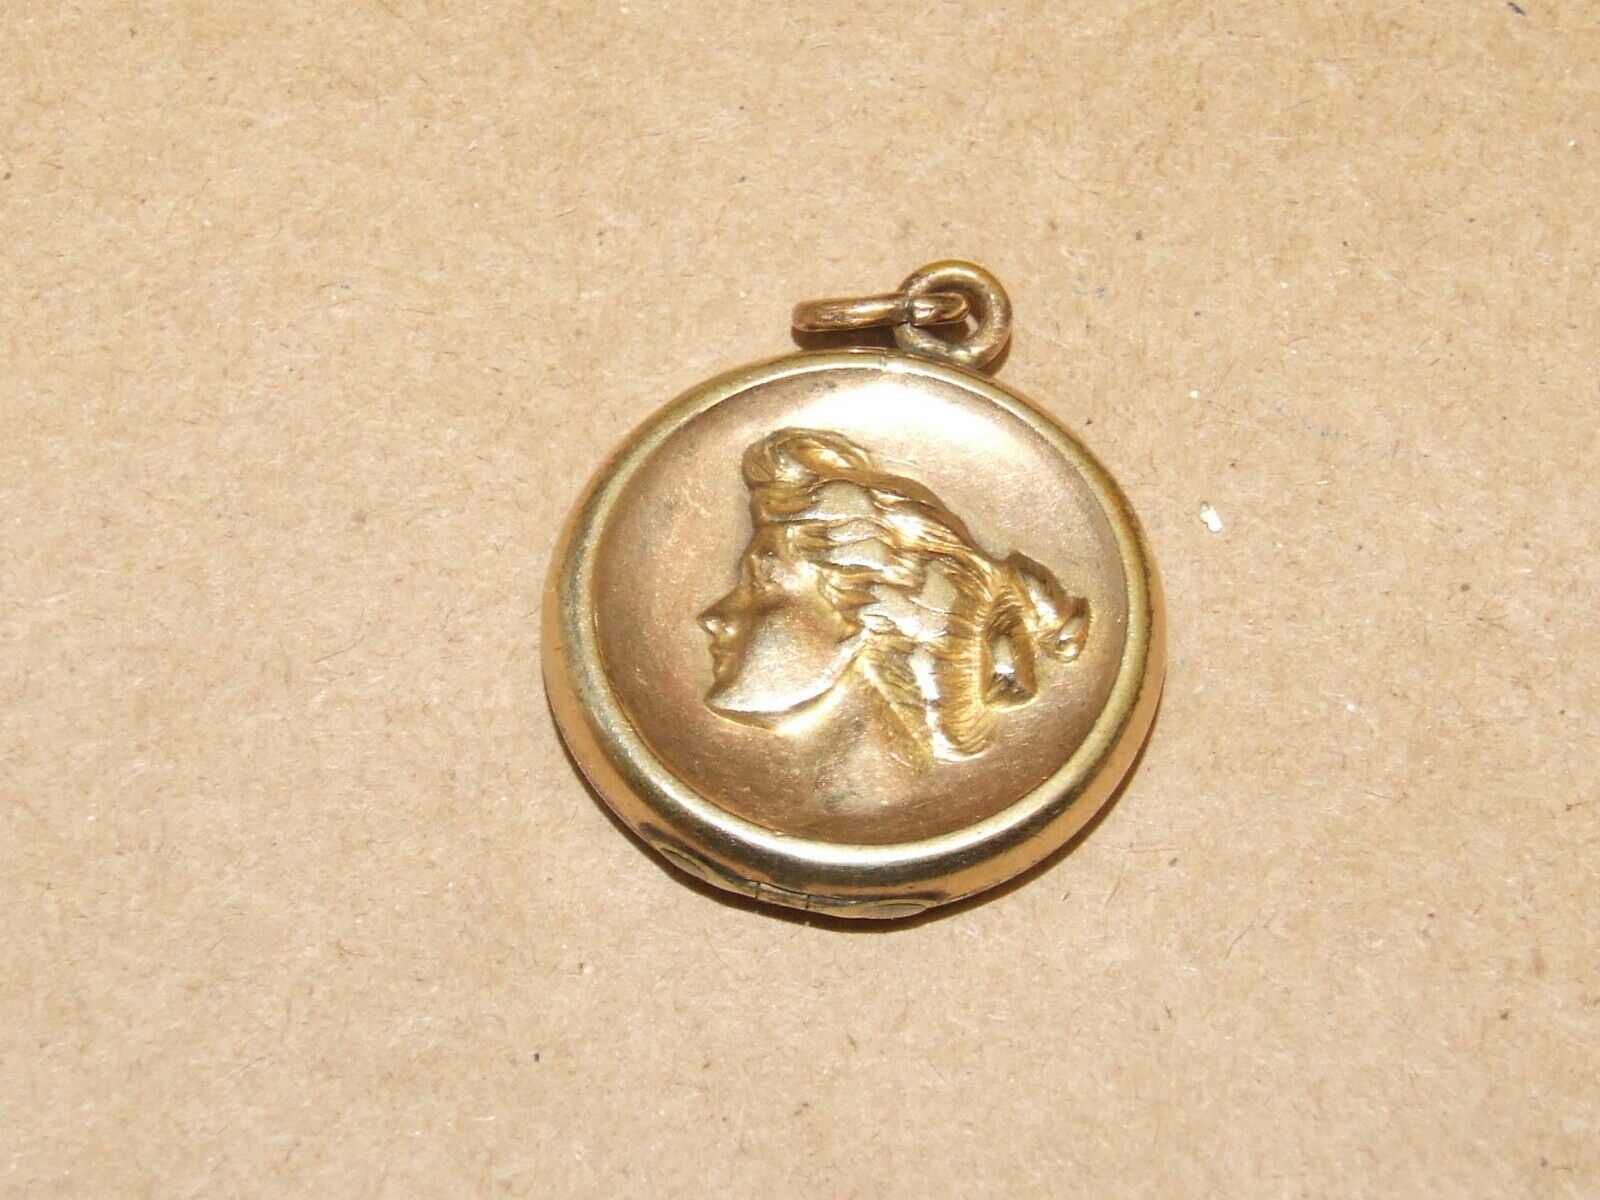 Vtg Antique Victorian W&h Co Wightman & Hough Gold Filled Cameo Locket Pendant